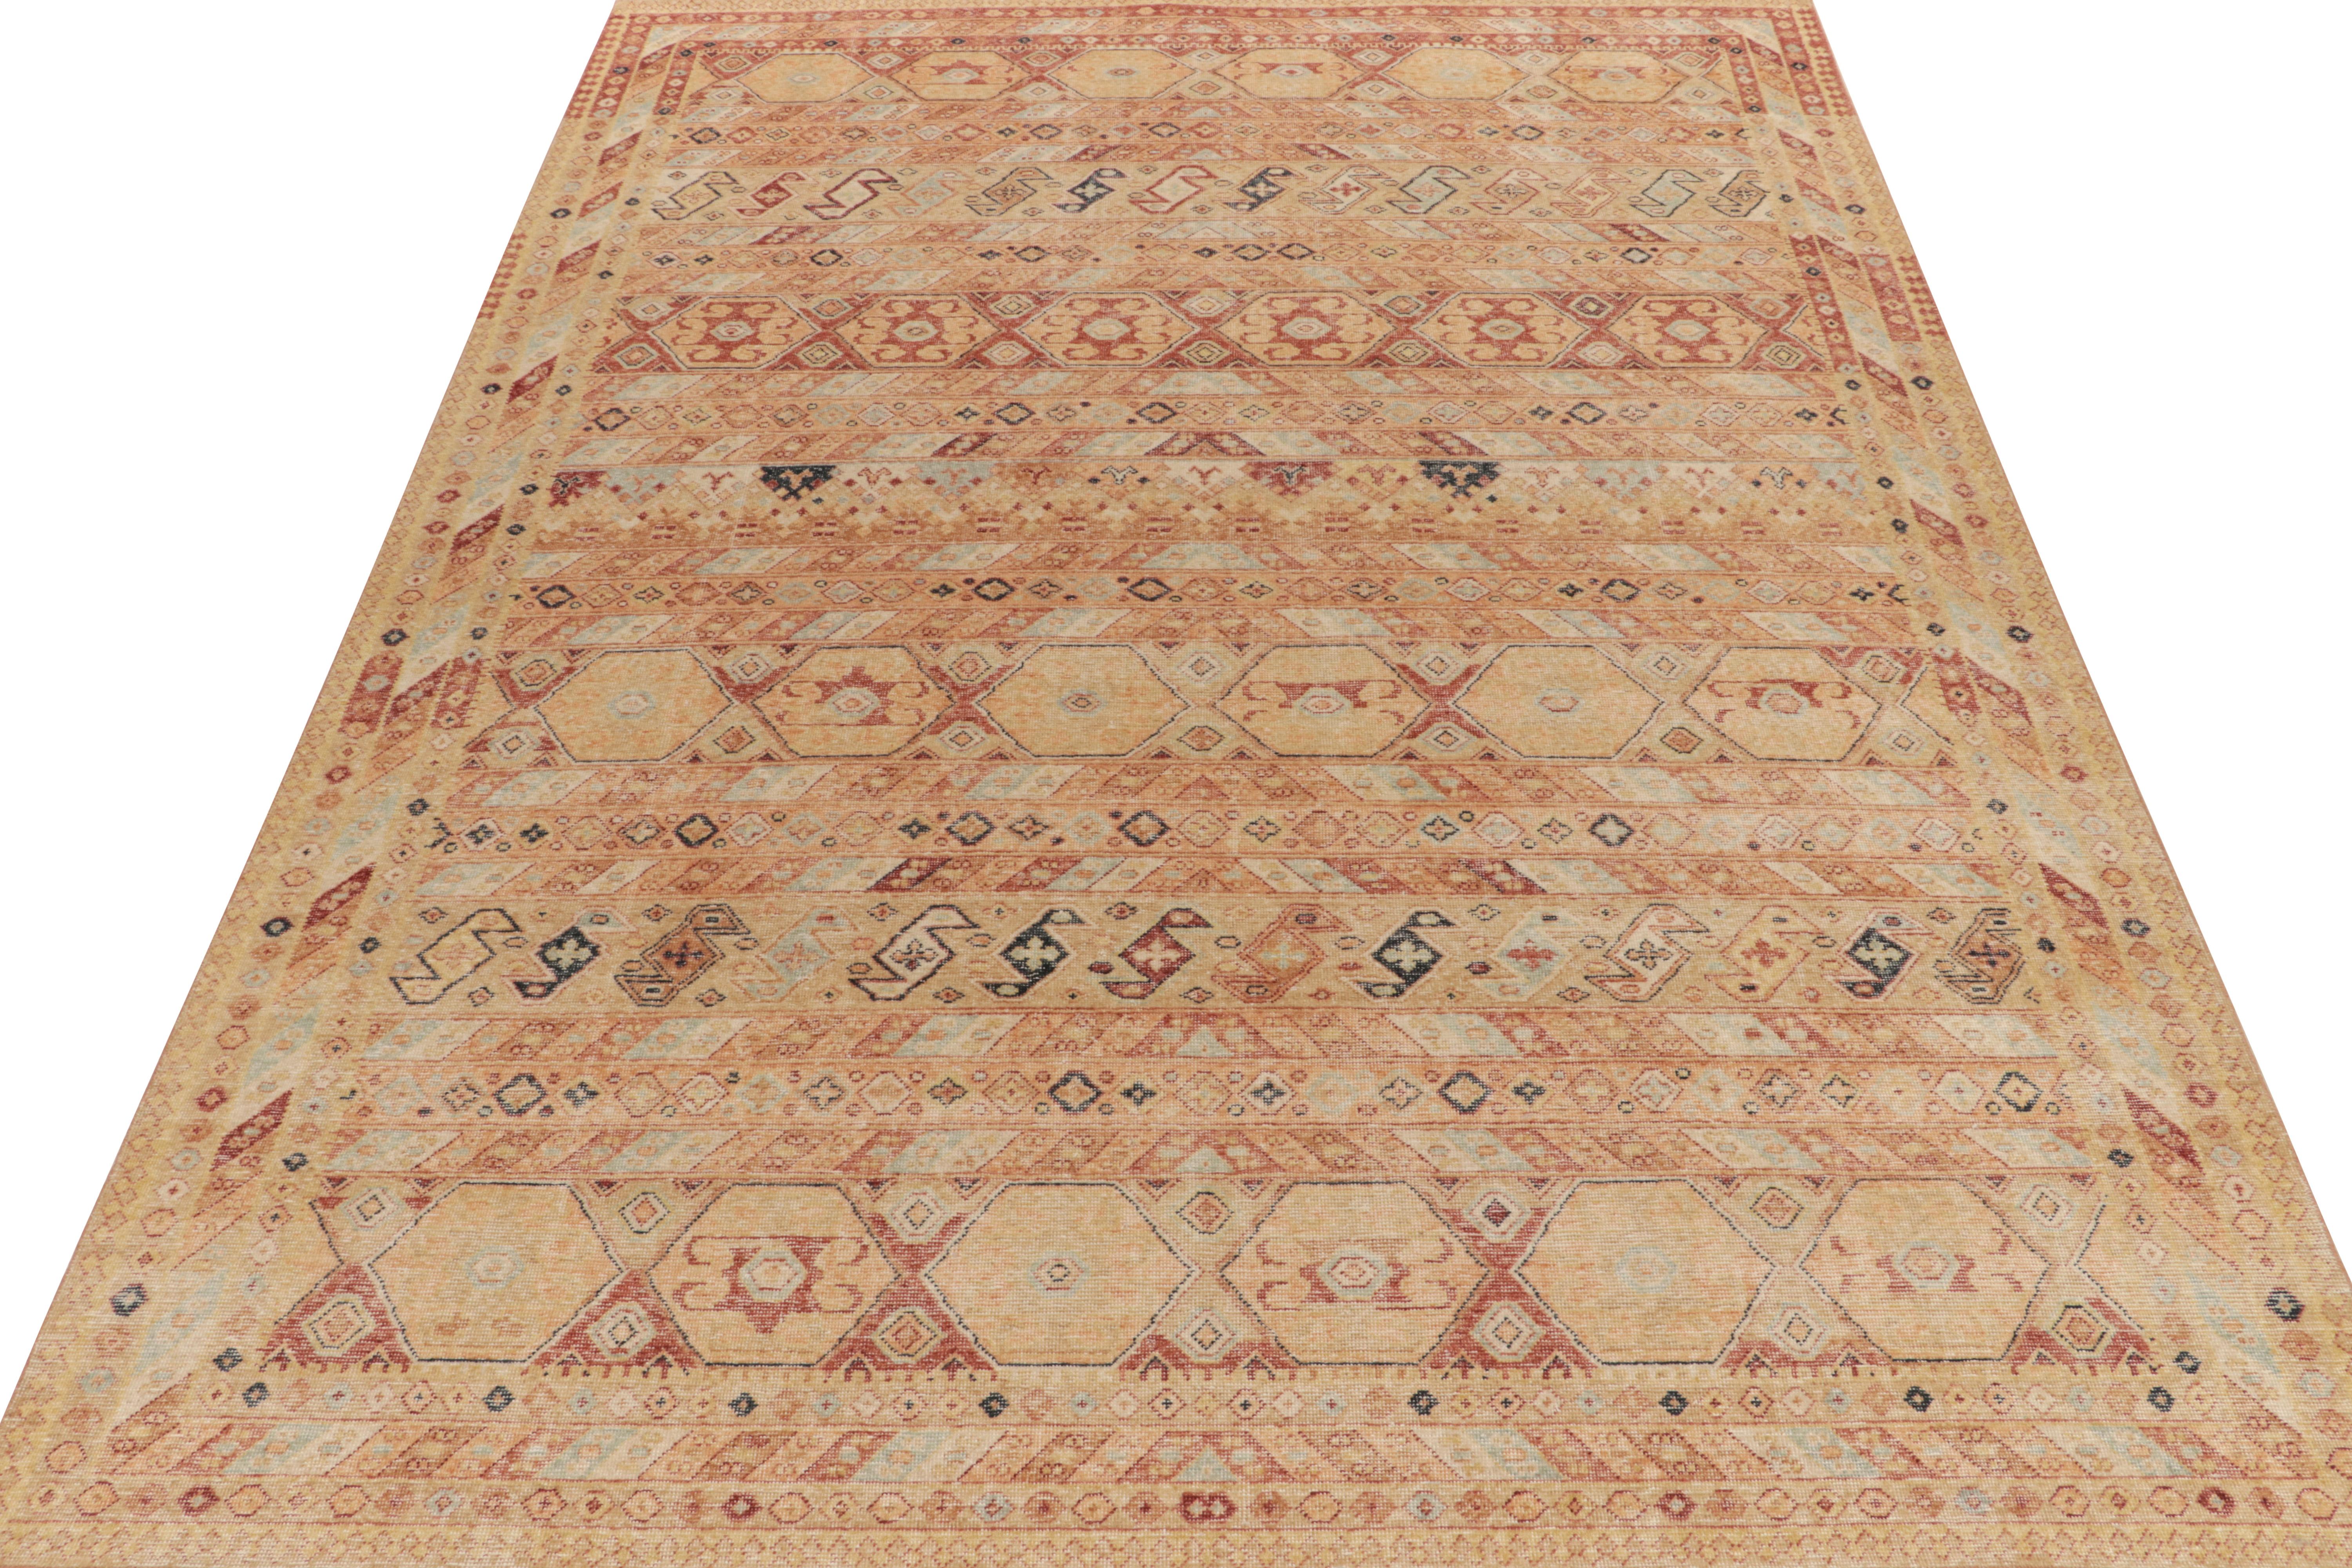 A 10x14 distressed style piece from Rug & Kilim’s Homage Collection, enjoying an impeccable hand-knotted wool in this textural shabby-chic style. Inspired by tribal carpet styles, the rug witnesses a joyful union of geometry & traditional motifs